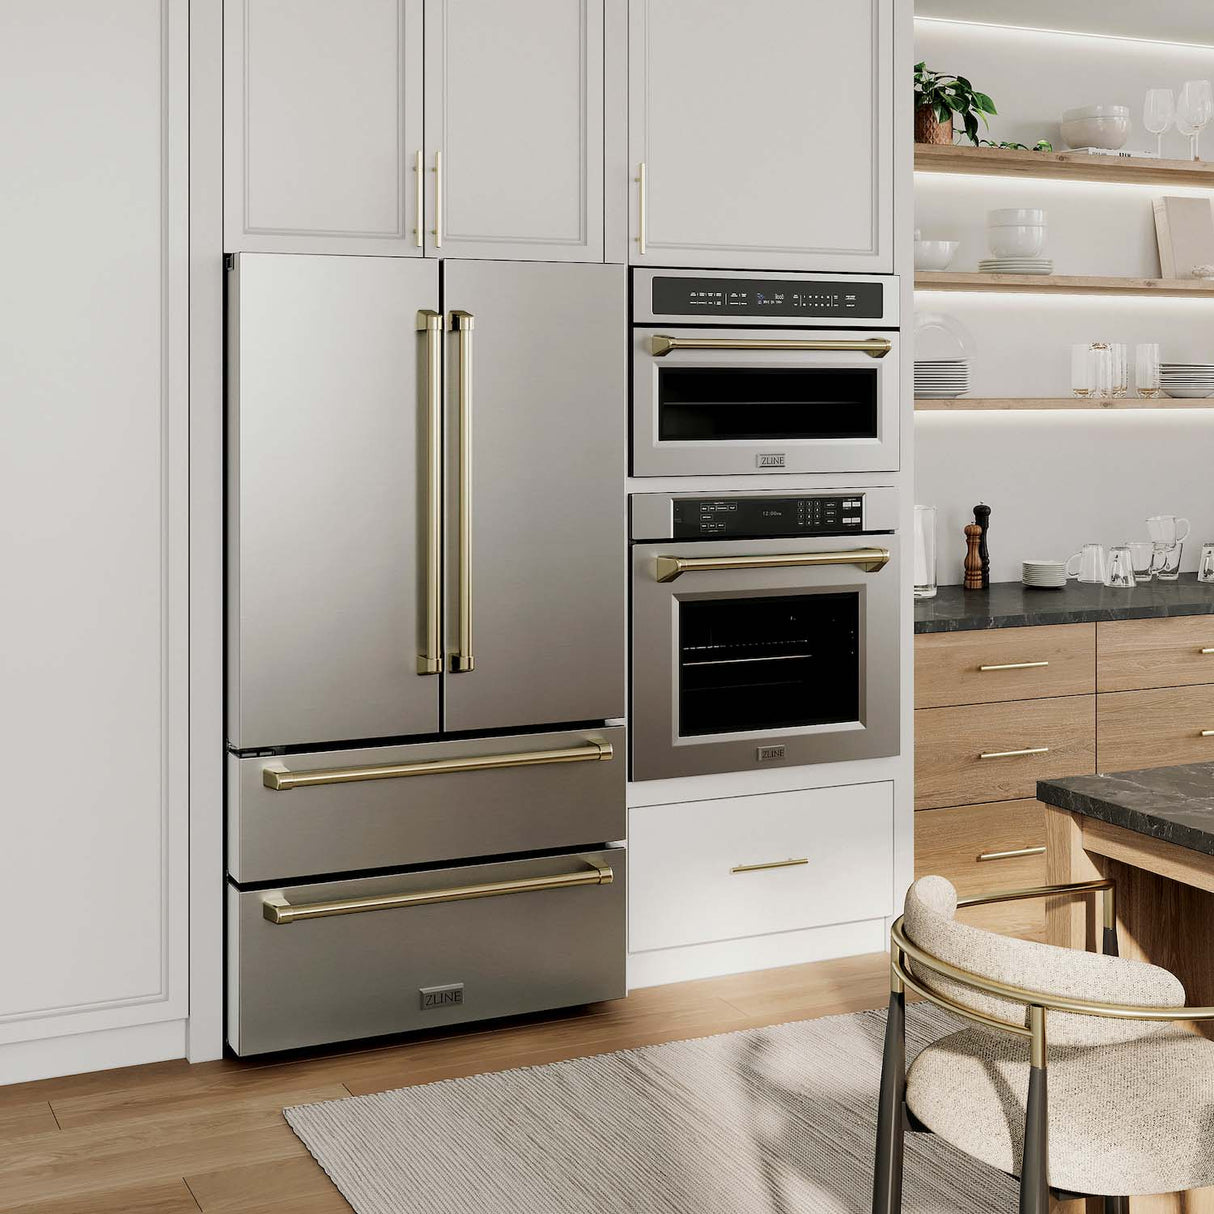 ZLINE Autograph Edition 30” Built-in Convection Microwave Oven in Stainless Steel Gold Accents